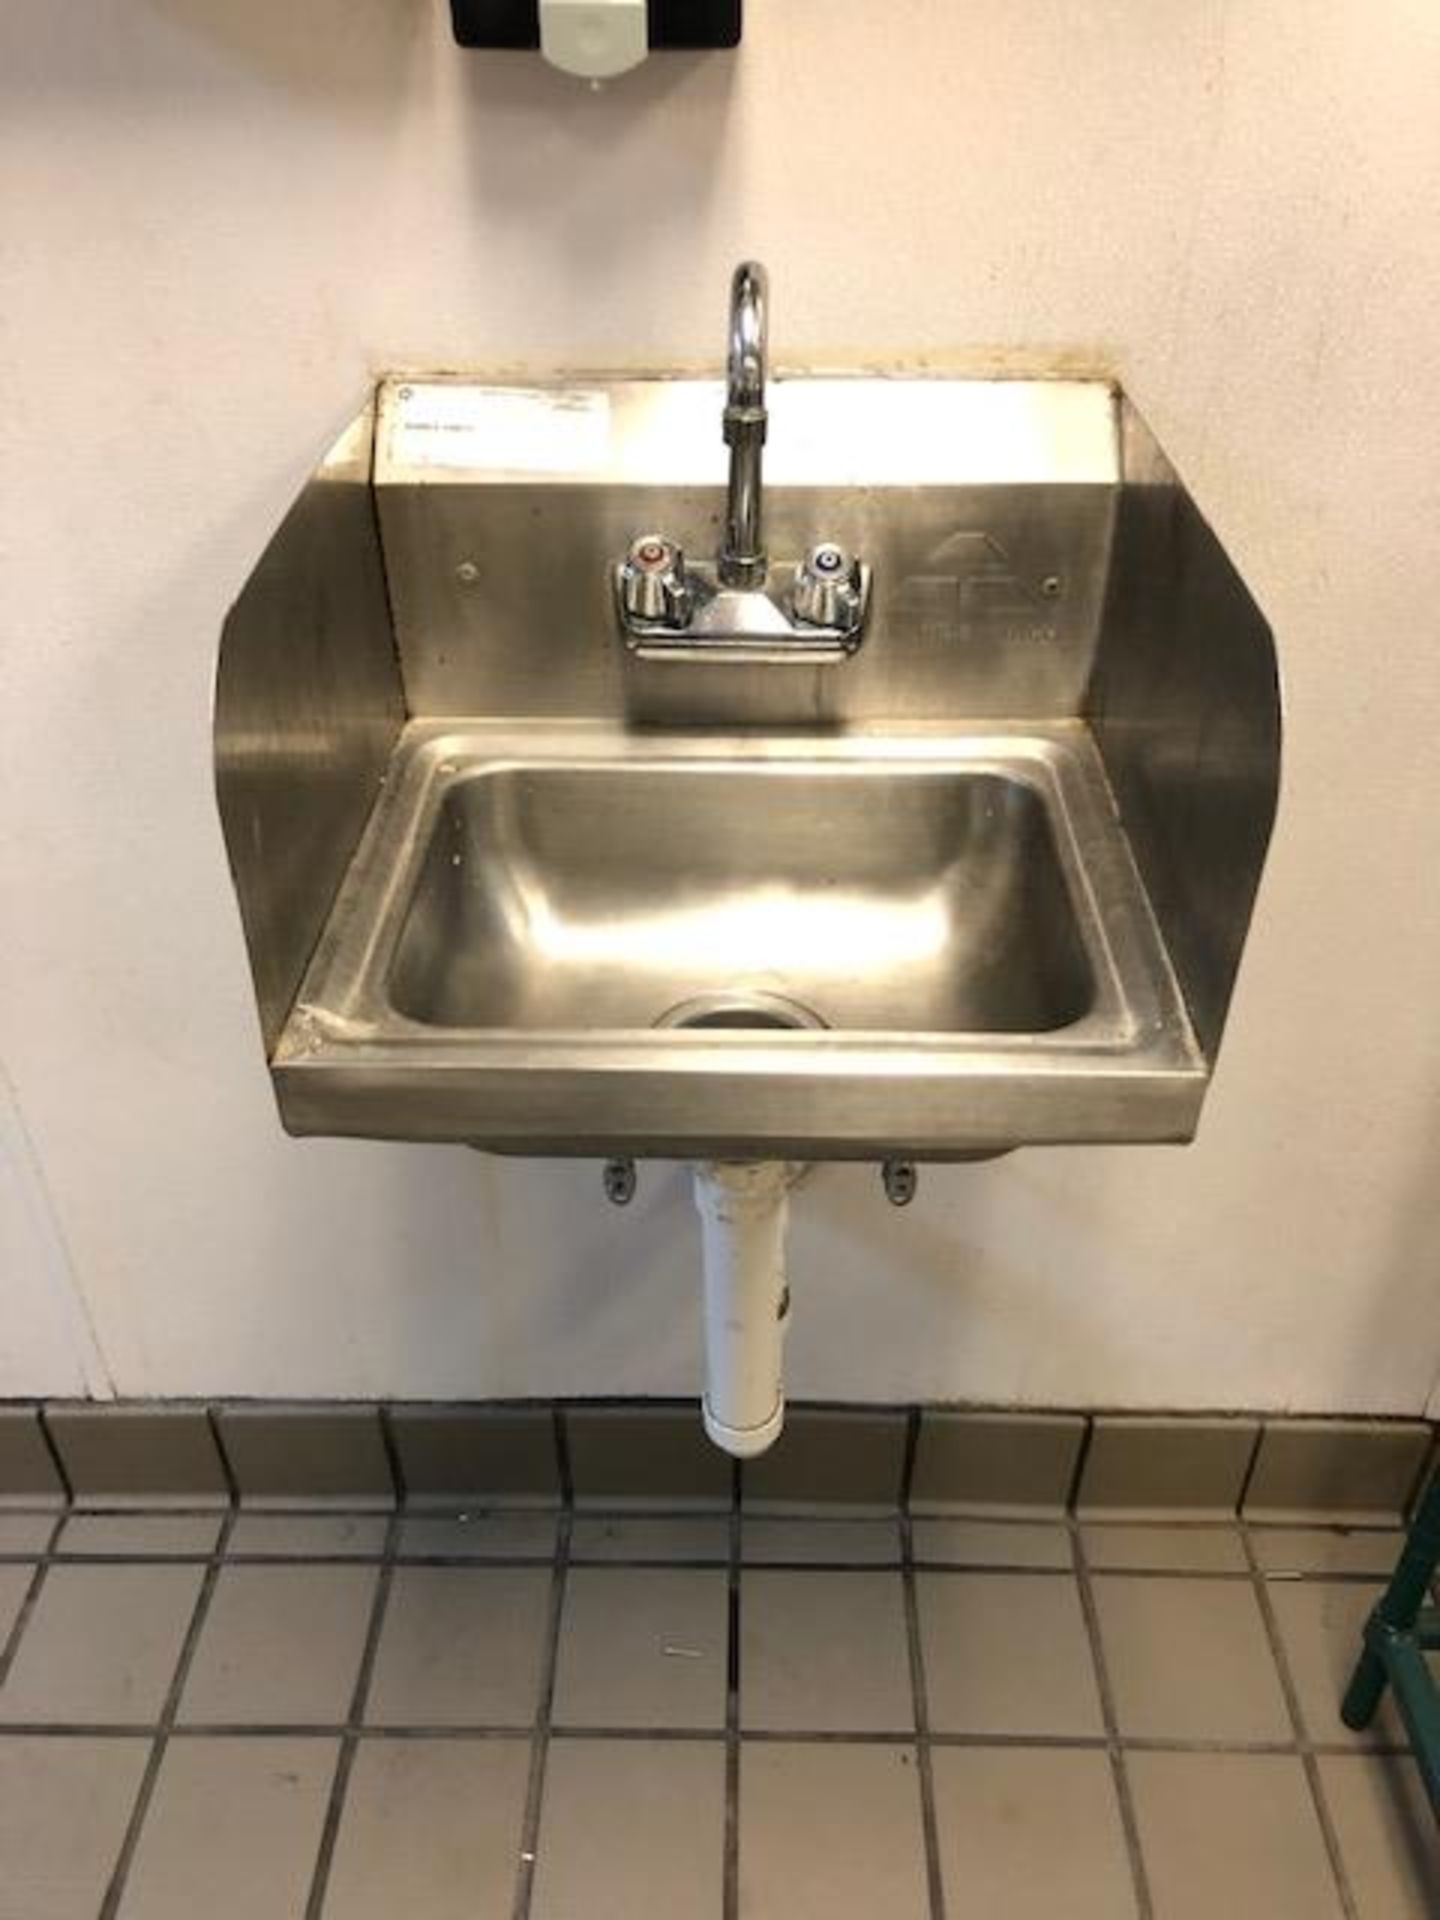 WALL MOUNT HAND SINK WITH FAUCET AND SIDE SPLASHES - Image 2 of 3